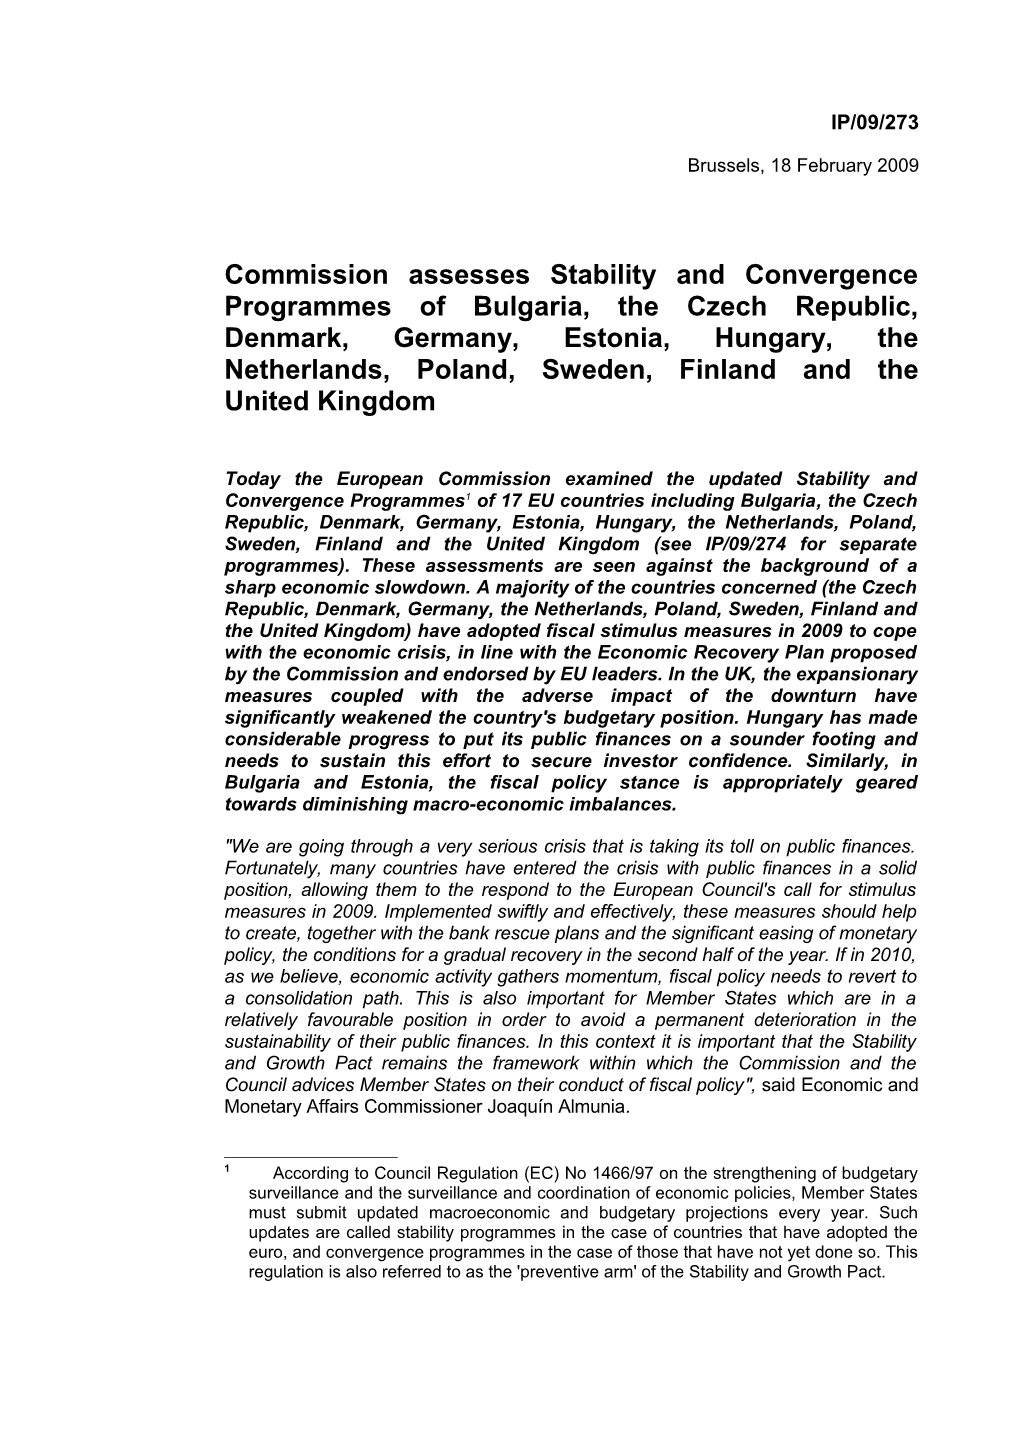 Commission Assesses Stability and Convergence Programmes of Bulgaria, the Czech Republic